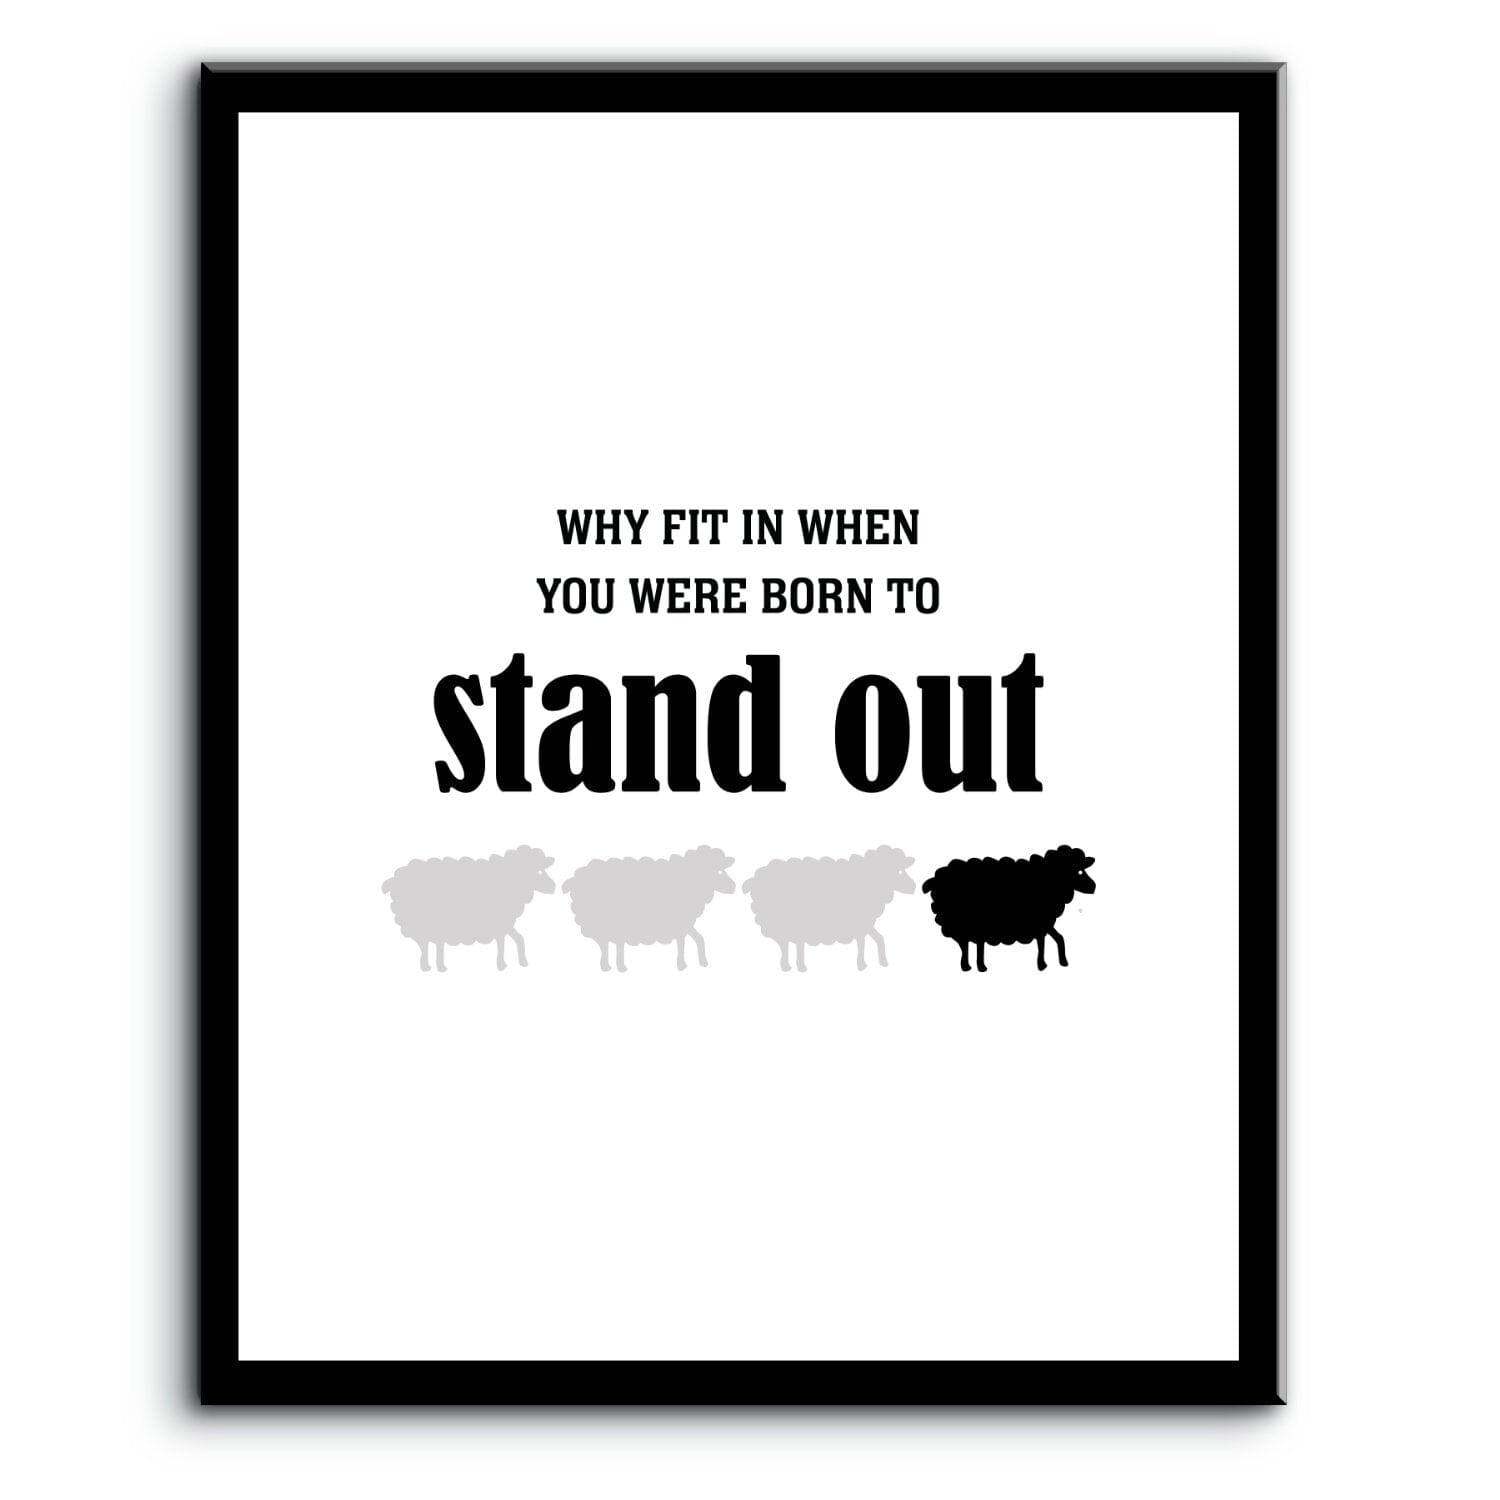 Why Fit in When You Were Born to Stand Out - Wise and Witty Print Wise and Wiseass Quotes Song Lyrics Art 8x10 Plaque Mount 